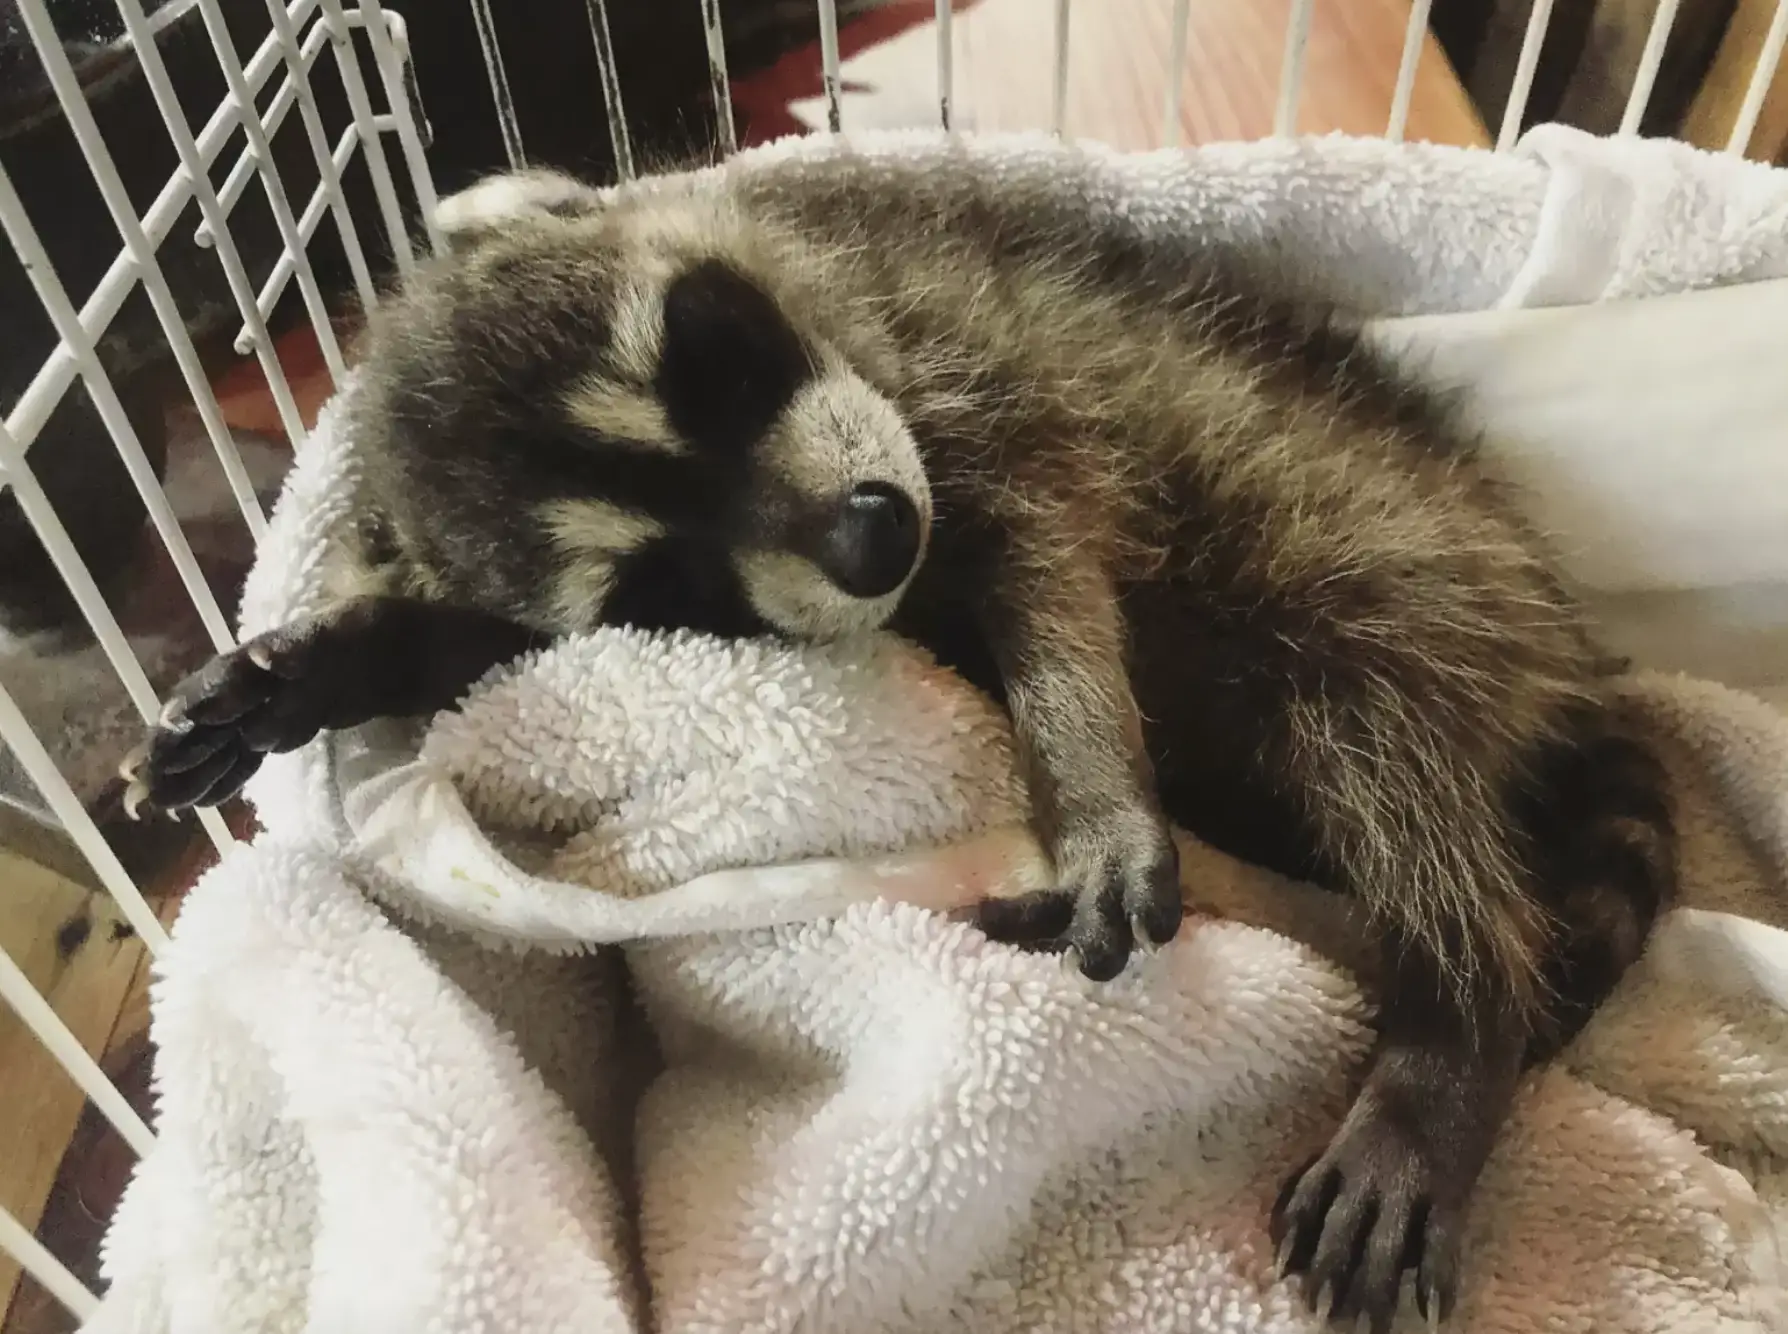 Carrie Long adopted and cared for a baby raccoon.